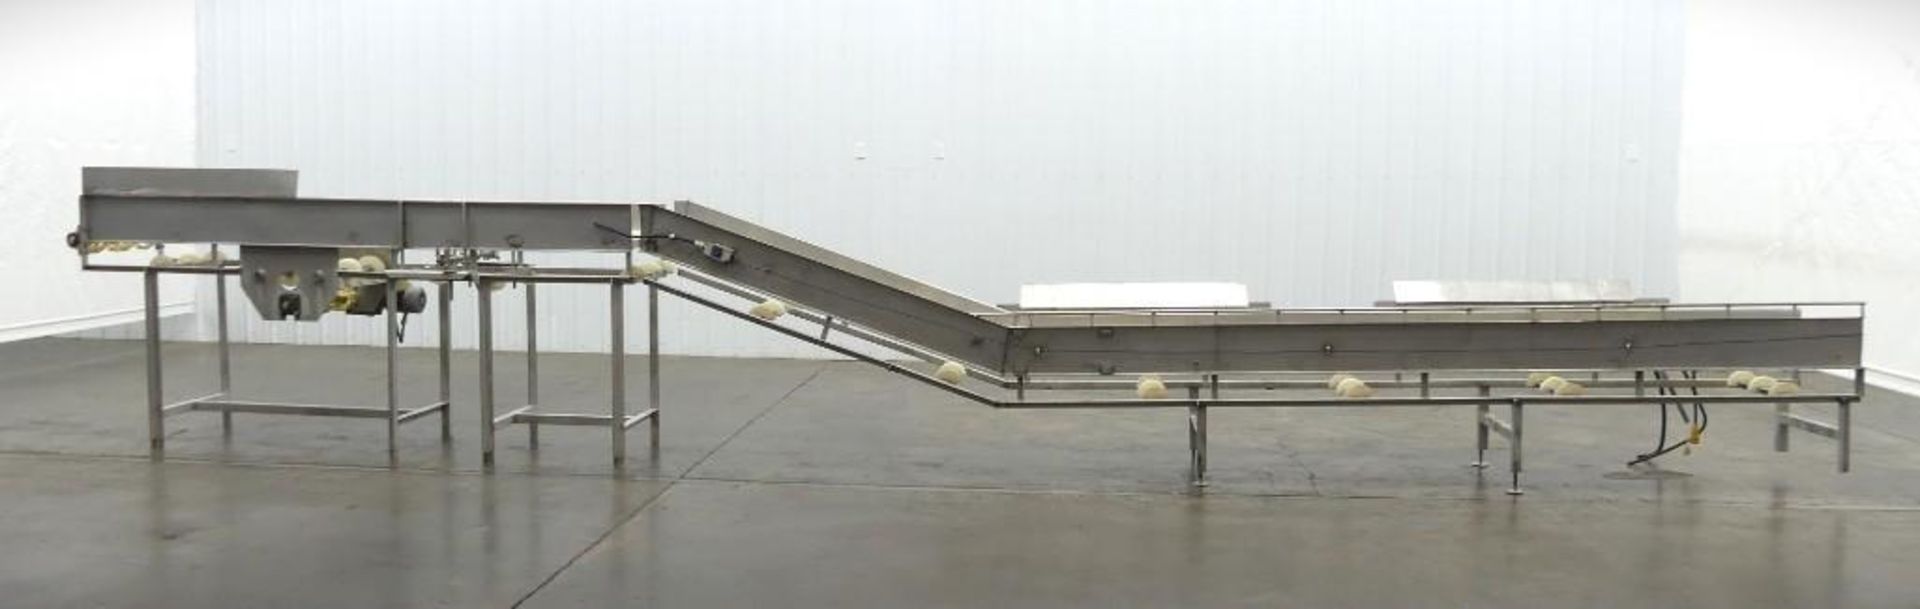 Two Stainless Conveyor Sections 20 Feet & 10 Feet